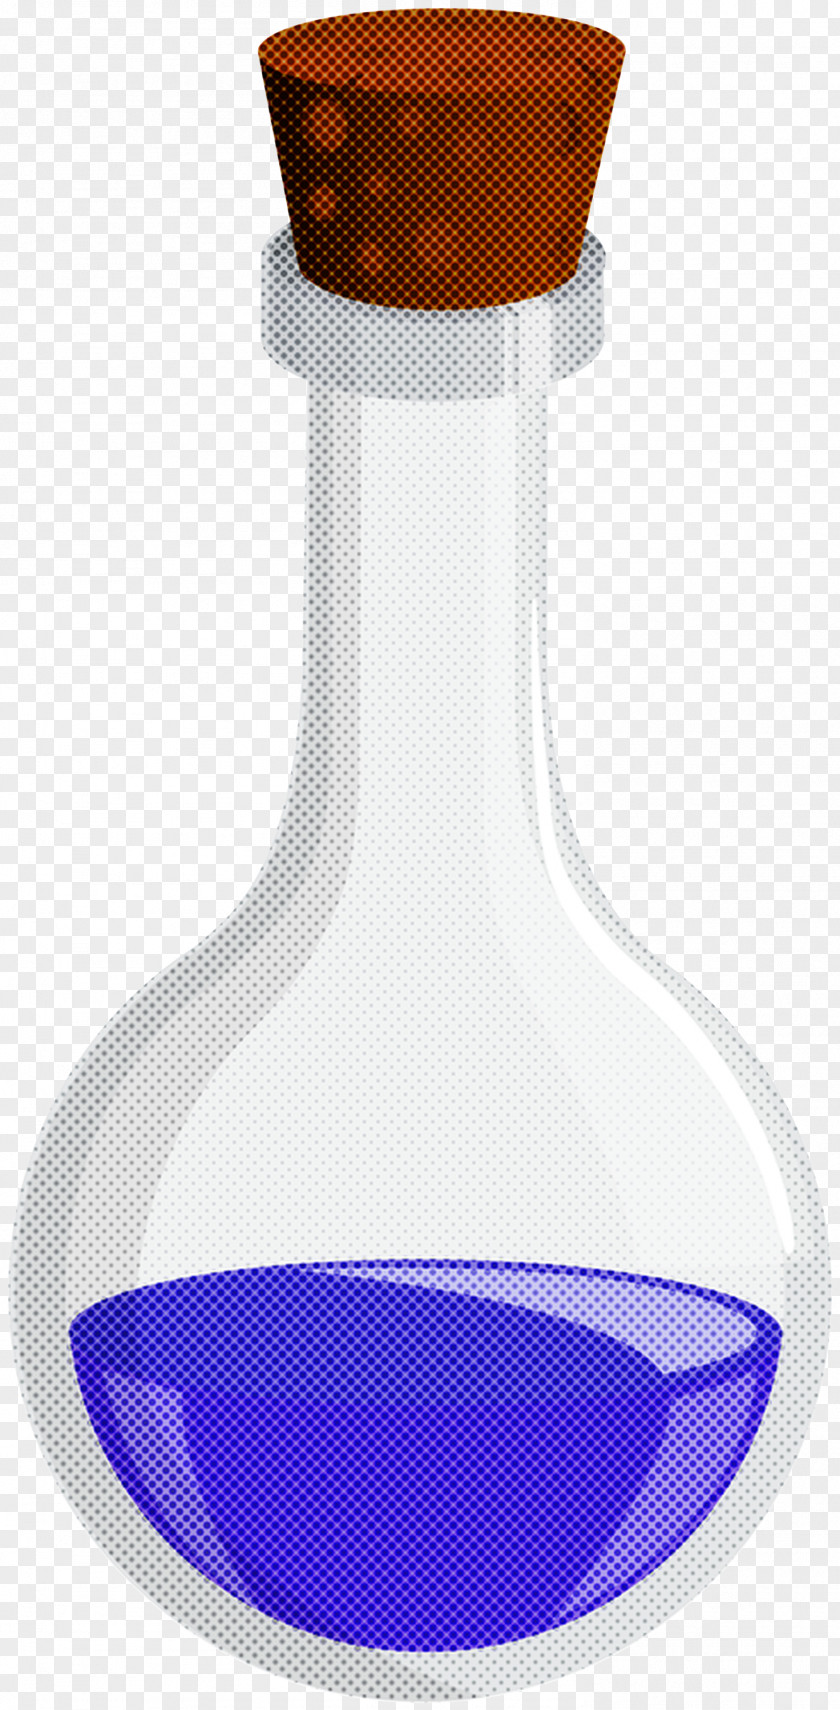 Decanter Glass Laboratory Flask Bottle Barware PNG